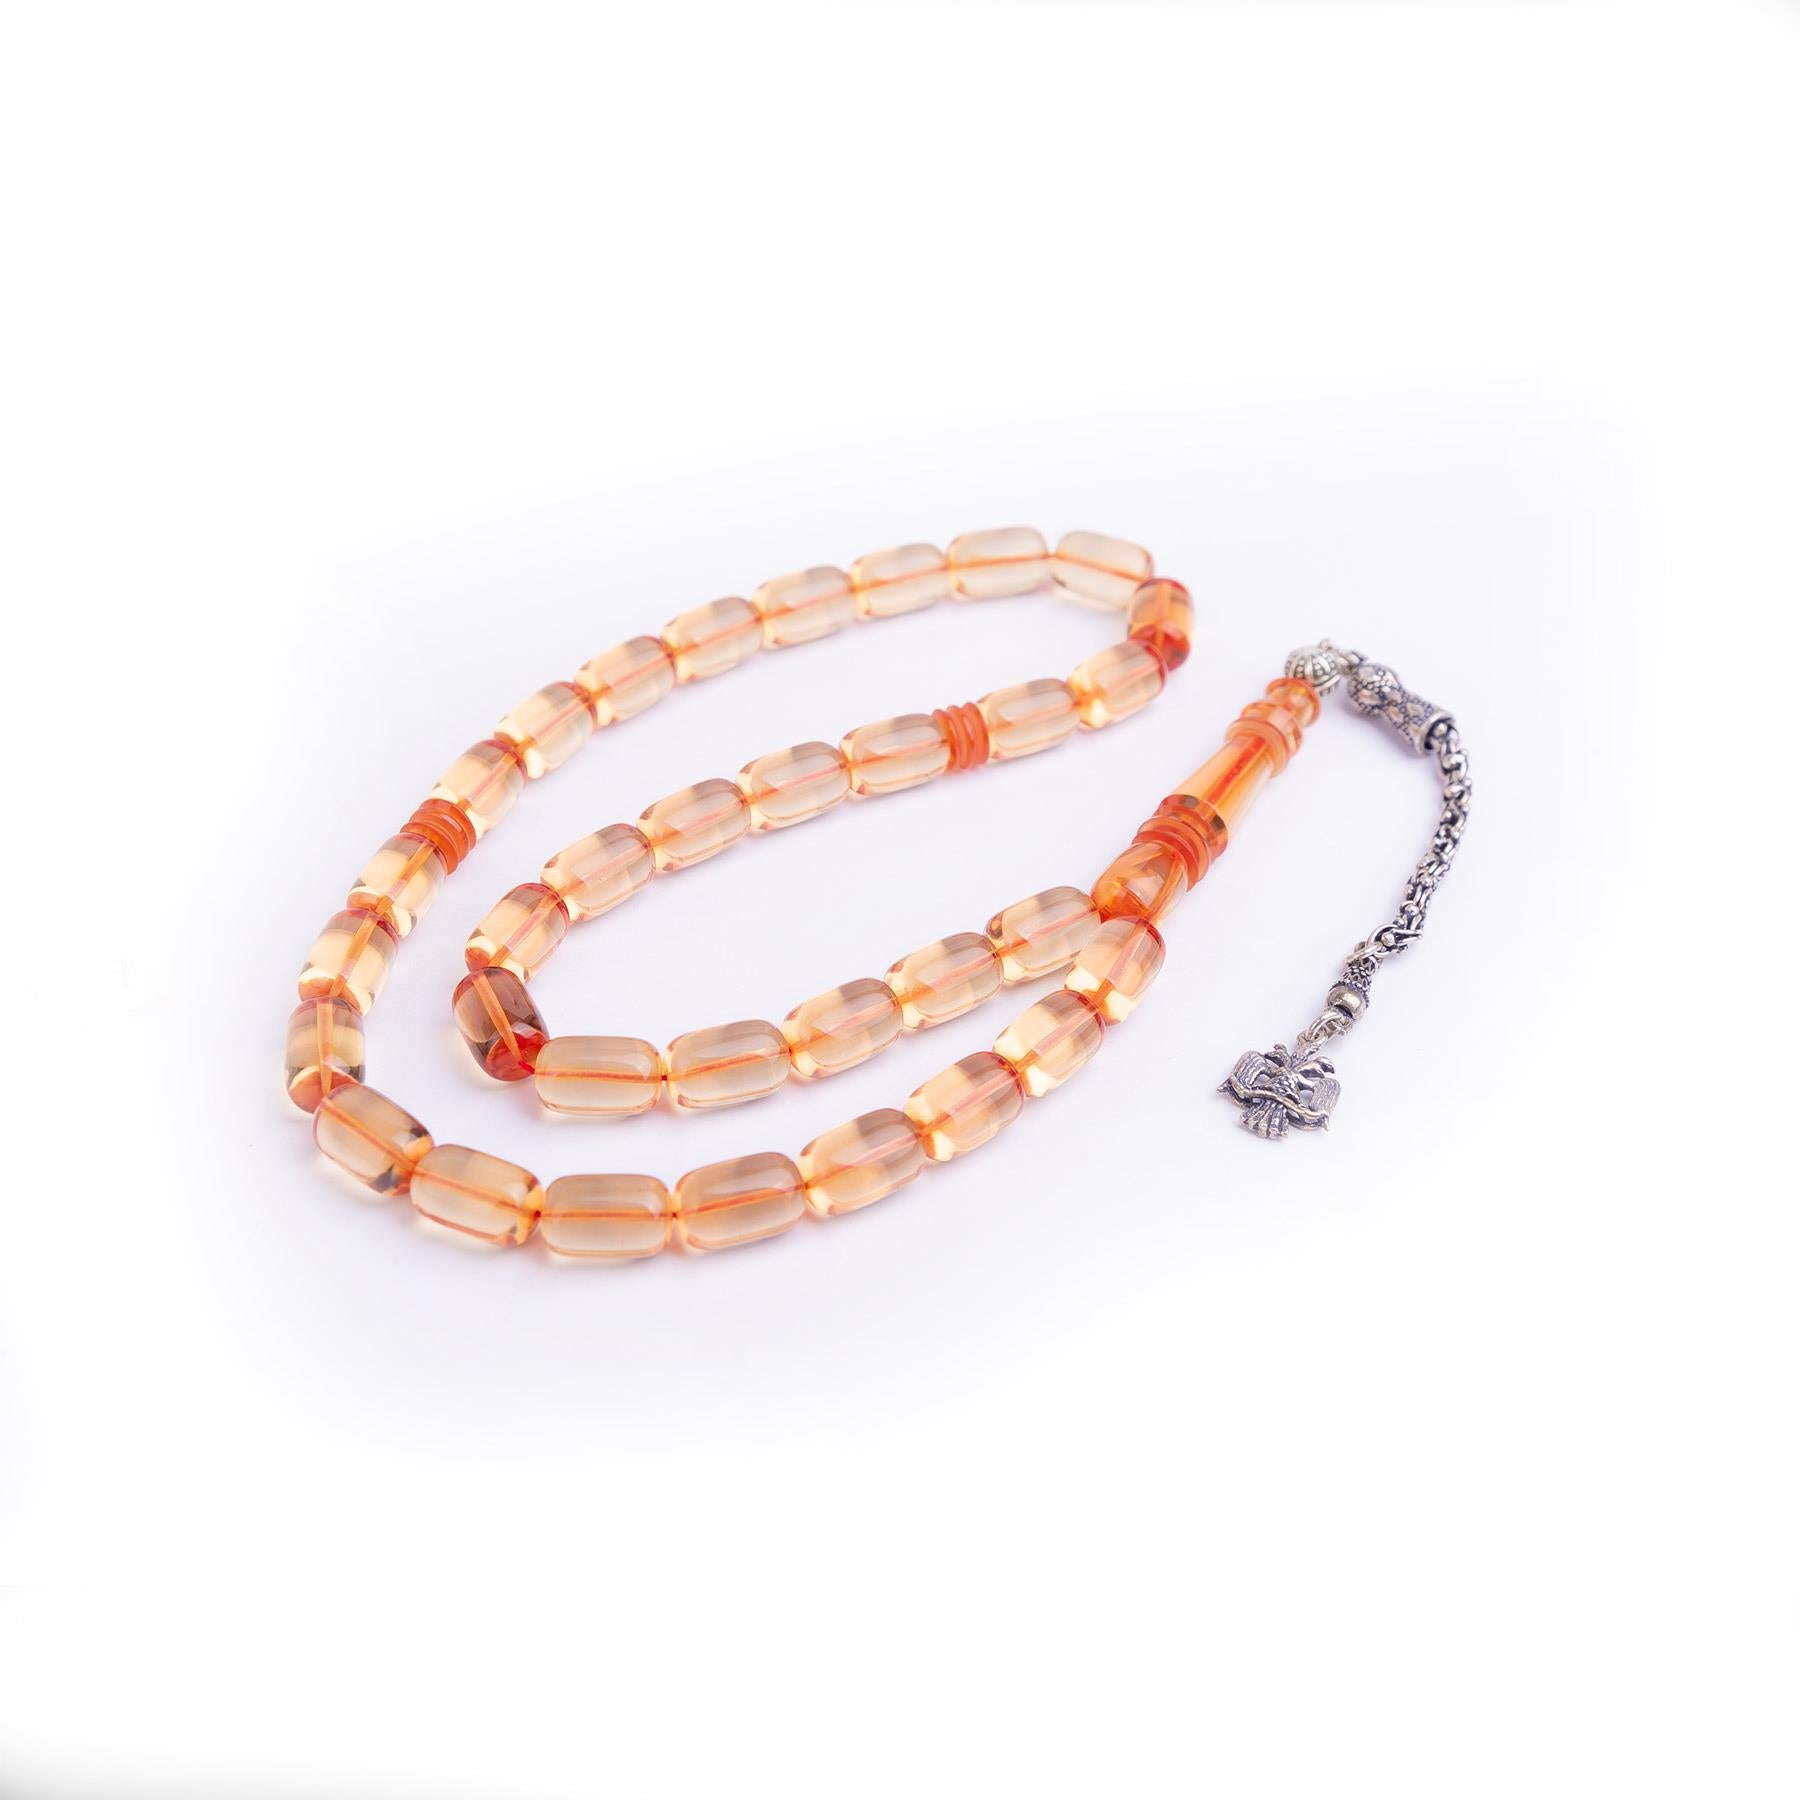 Ve Tesbih Capsule Cut Fire Amber Rosary with Silver Tassels 4